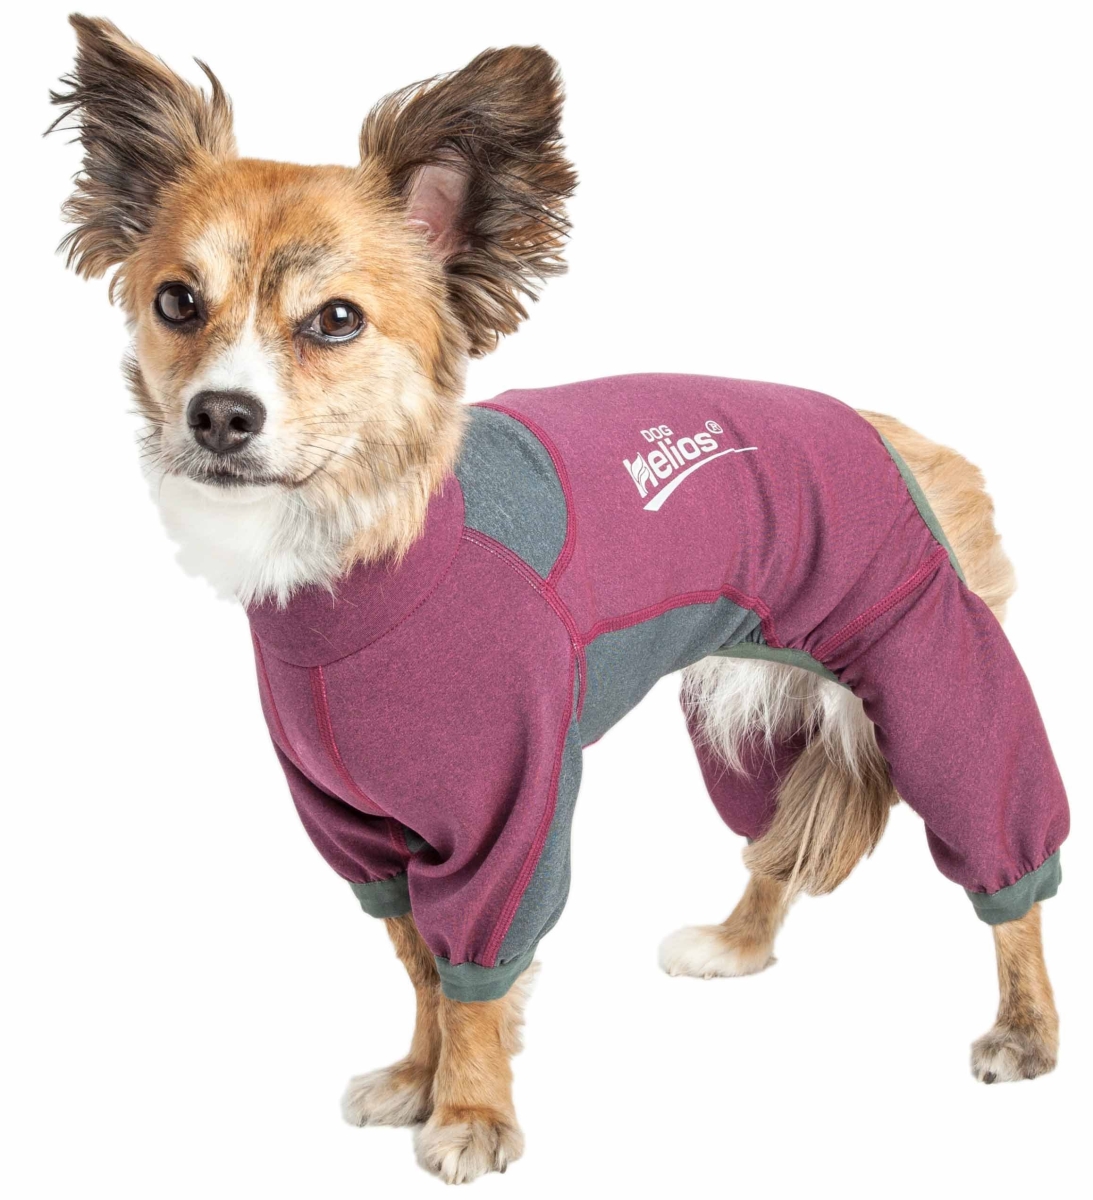 Yghl8pkxs Rufflex 4-way-stretch Breathable Full Bodied Performance Dog Warmup Track Suit - Pink & Grey, Extra Small